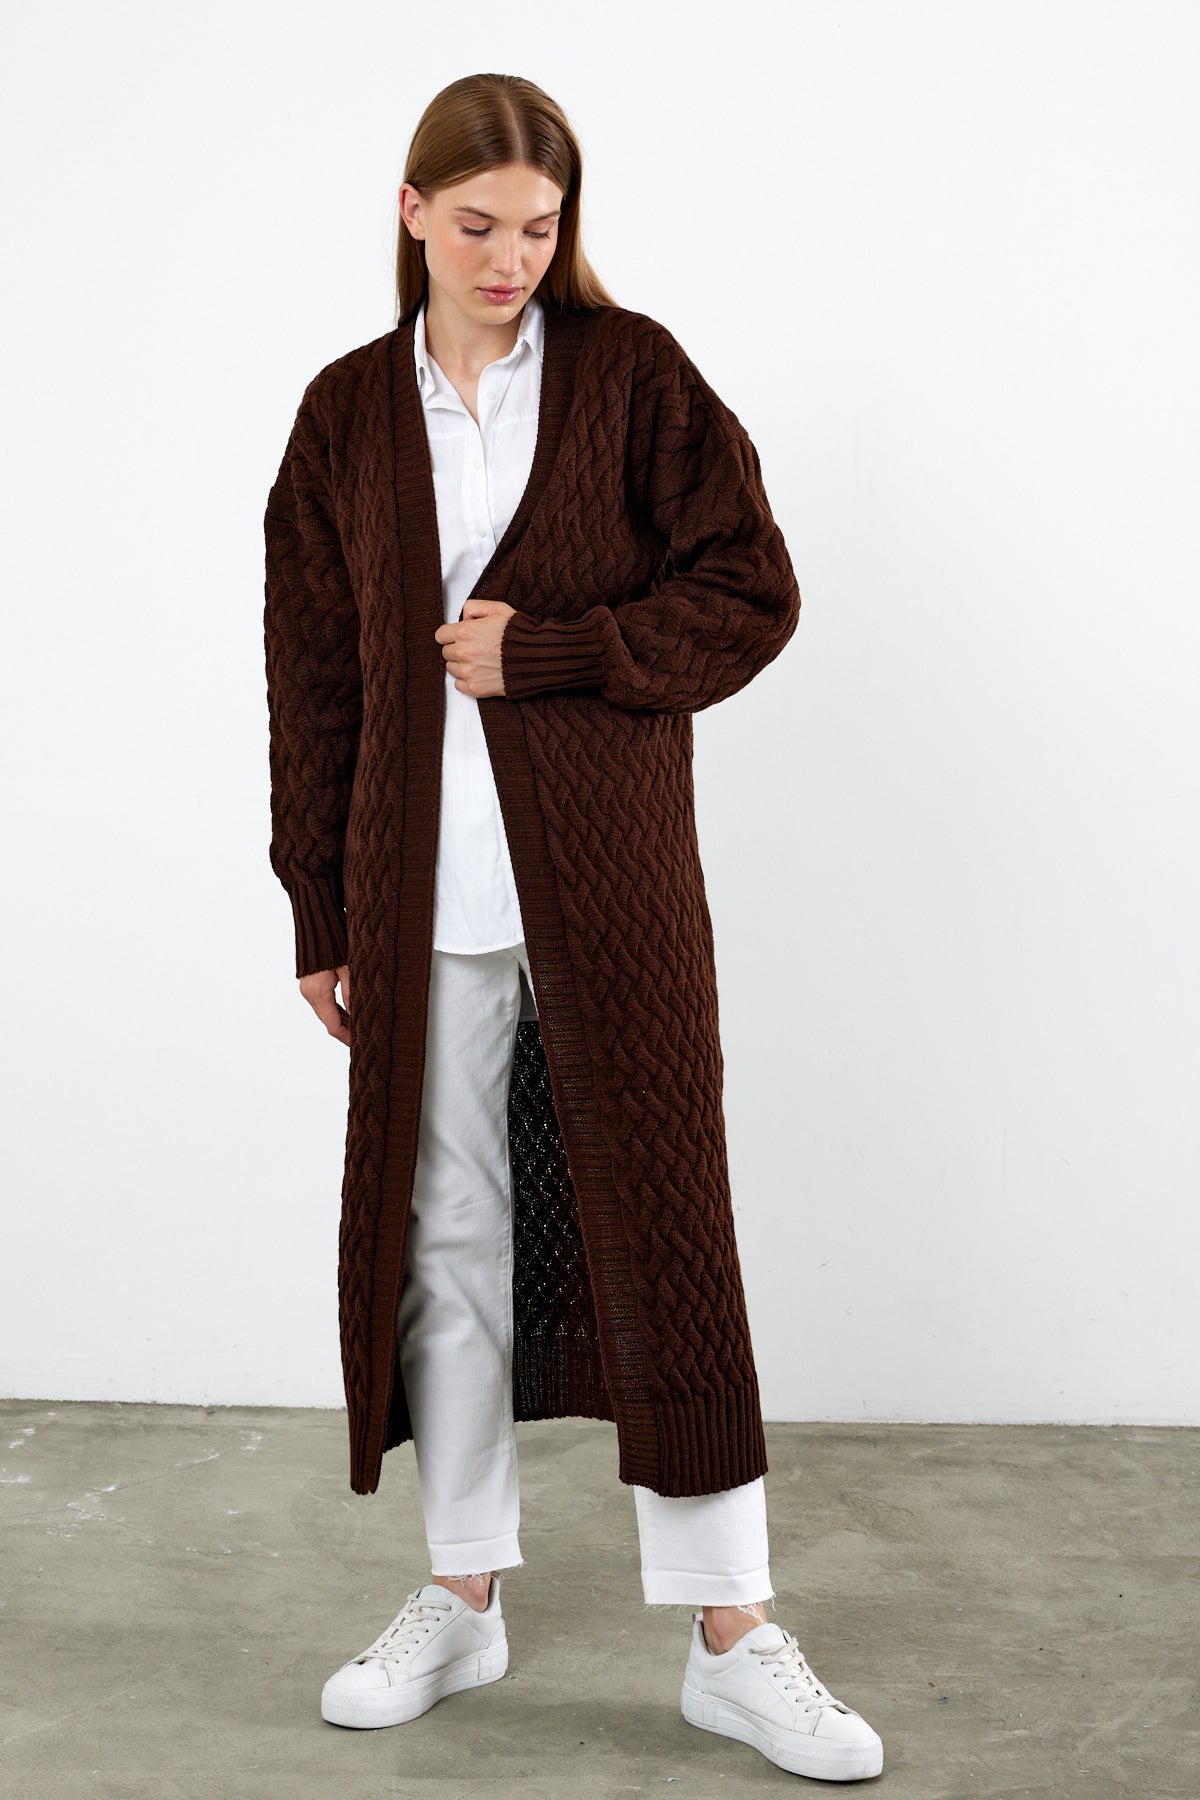 Long Length Knit Cardigan Maxi Length Cover Up Knit Detailed Solid Color - SKU: 3860